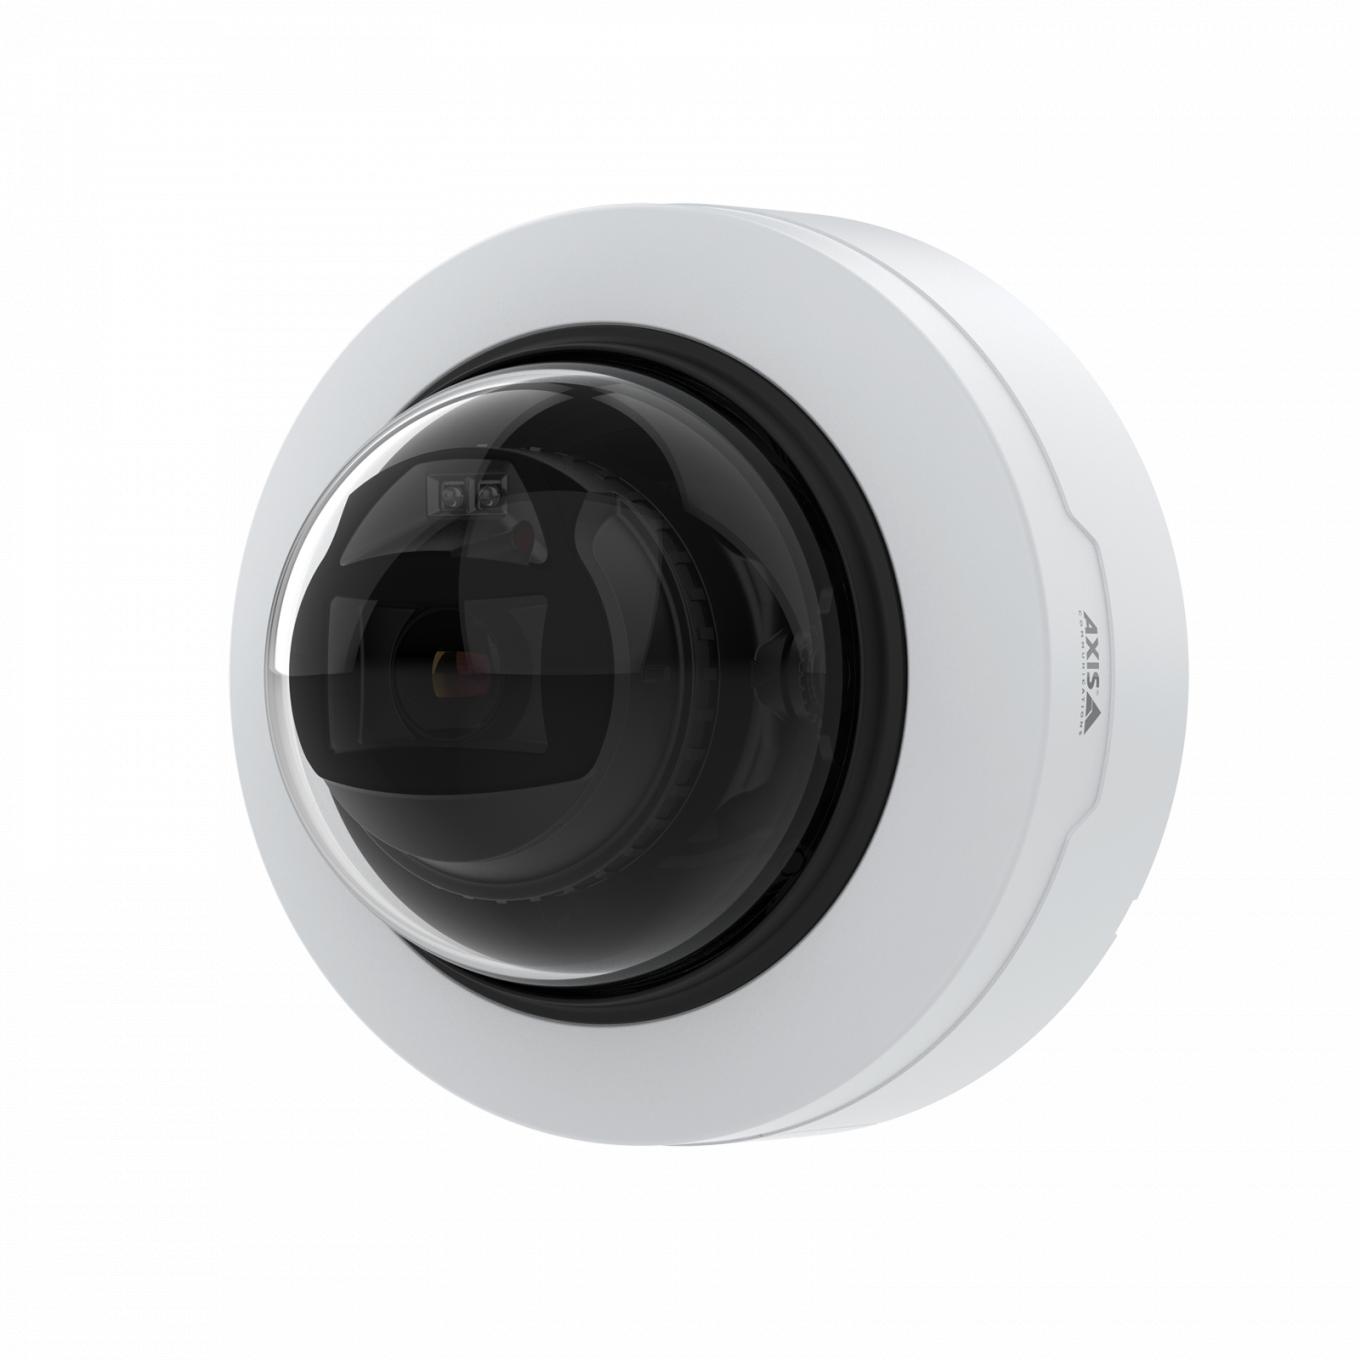 AXIS P3265-LV Dome Camera | Axis Communications